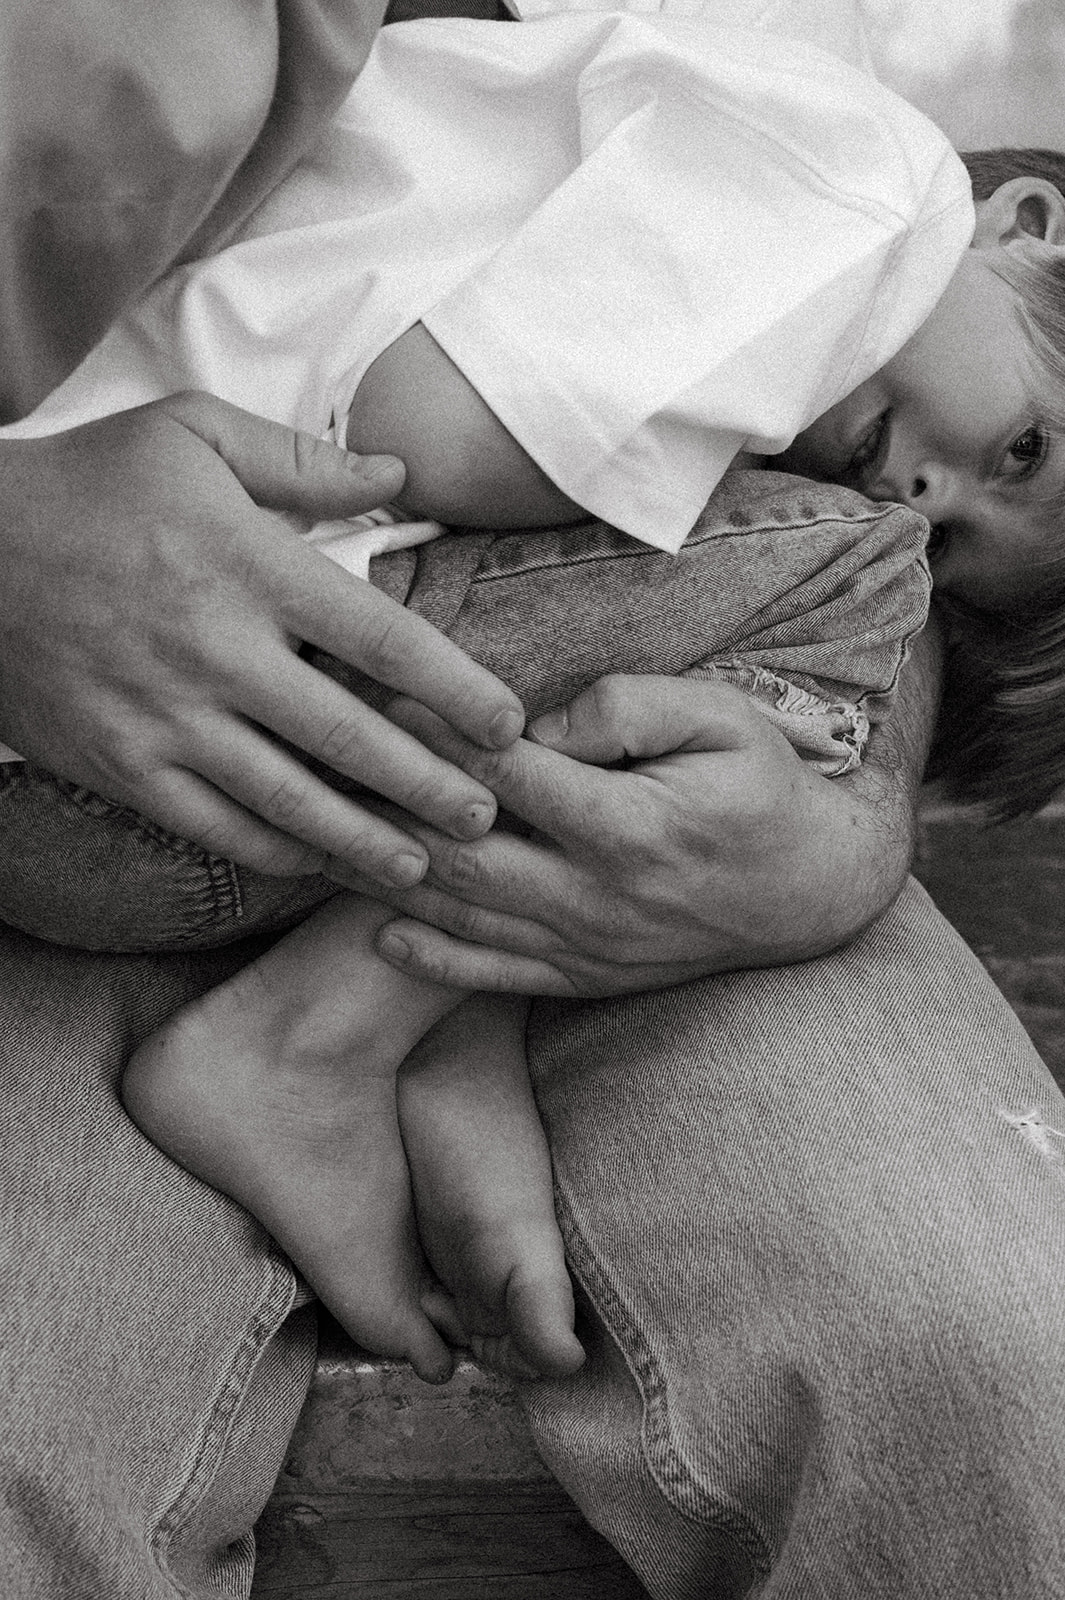 detail photo of dad holding son in black and white